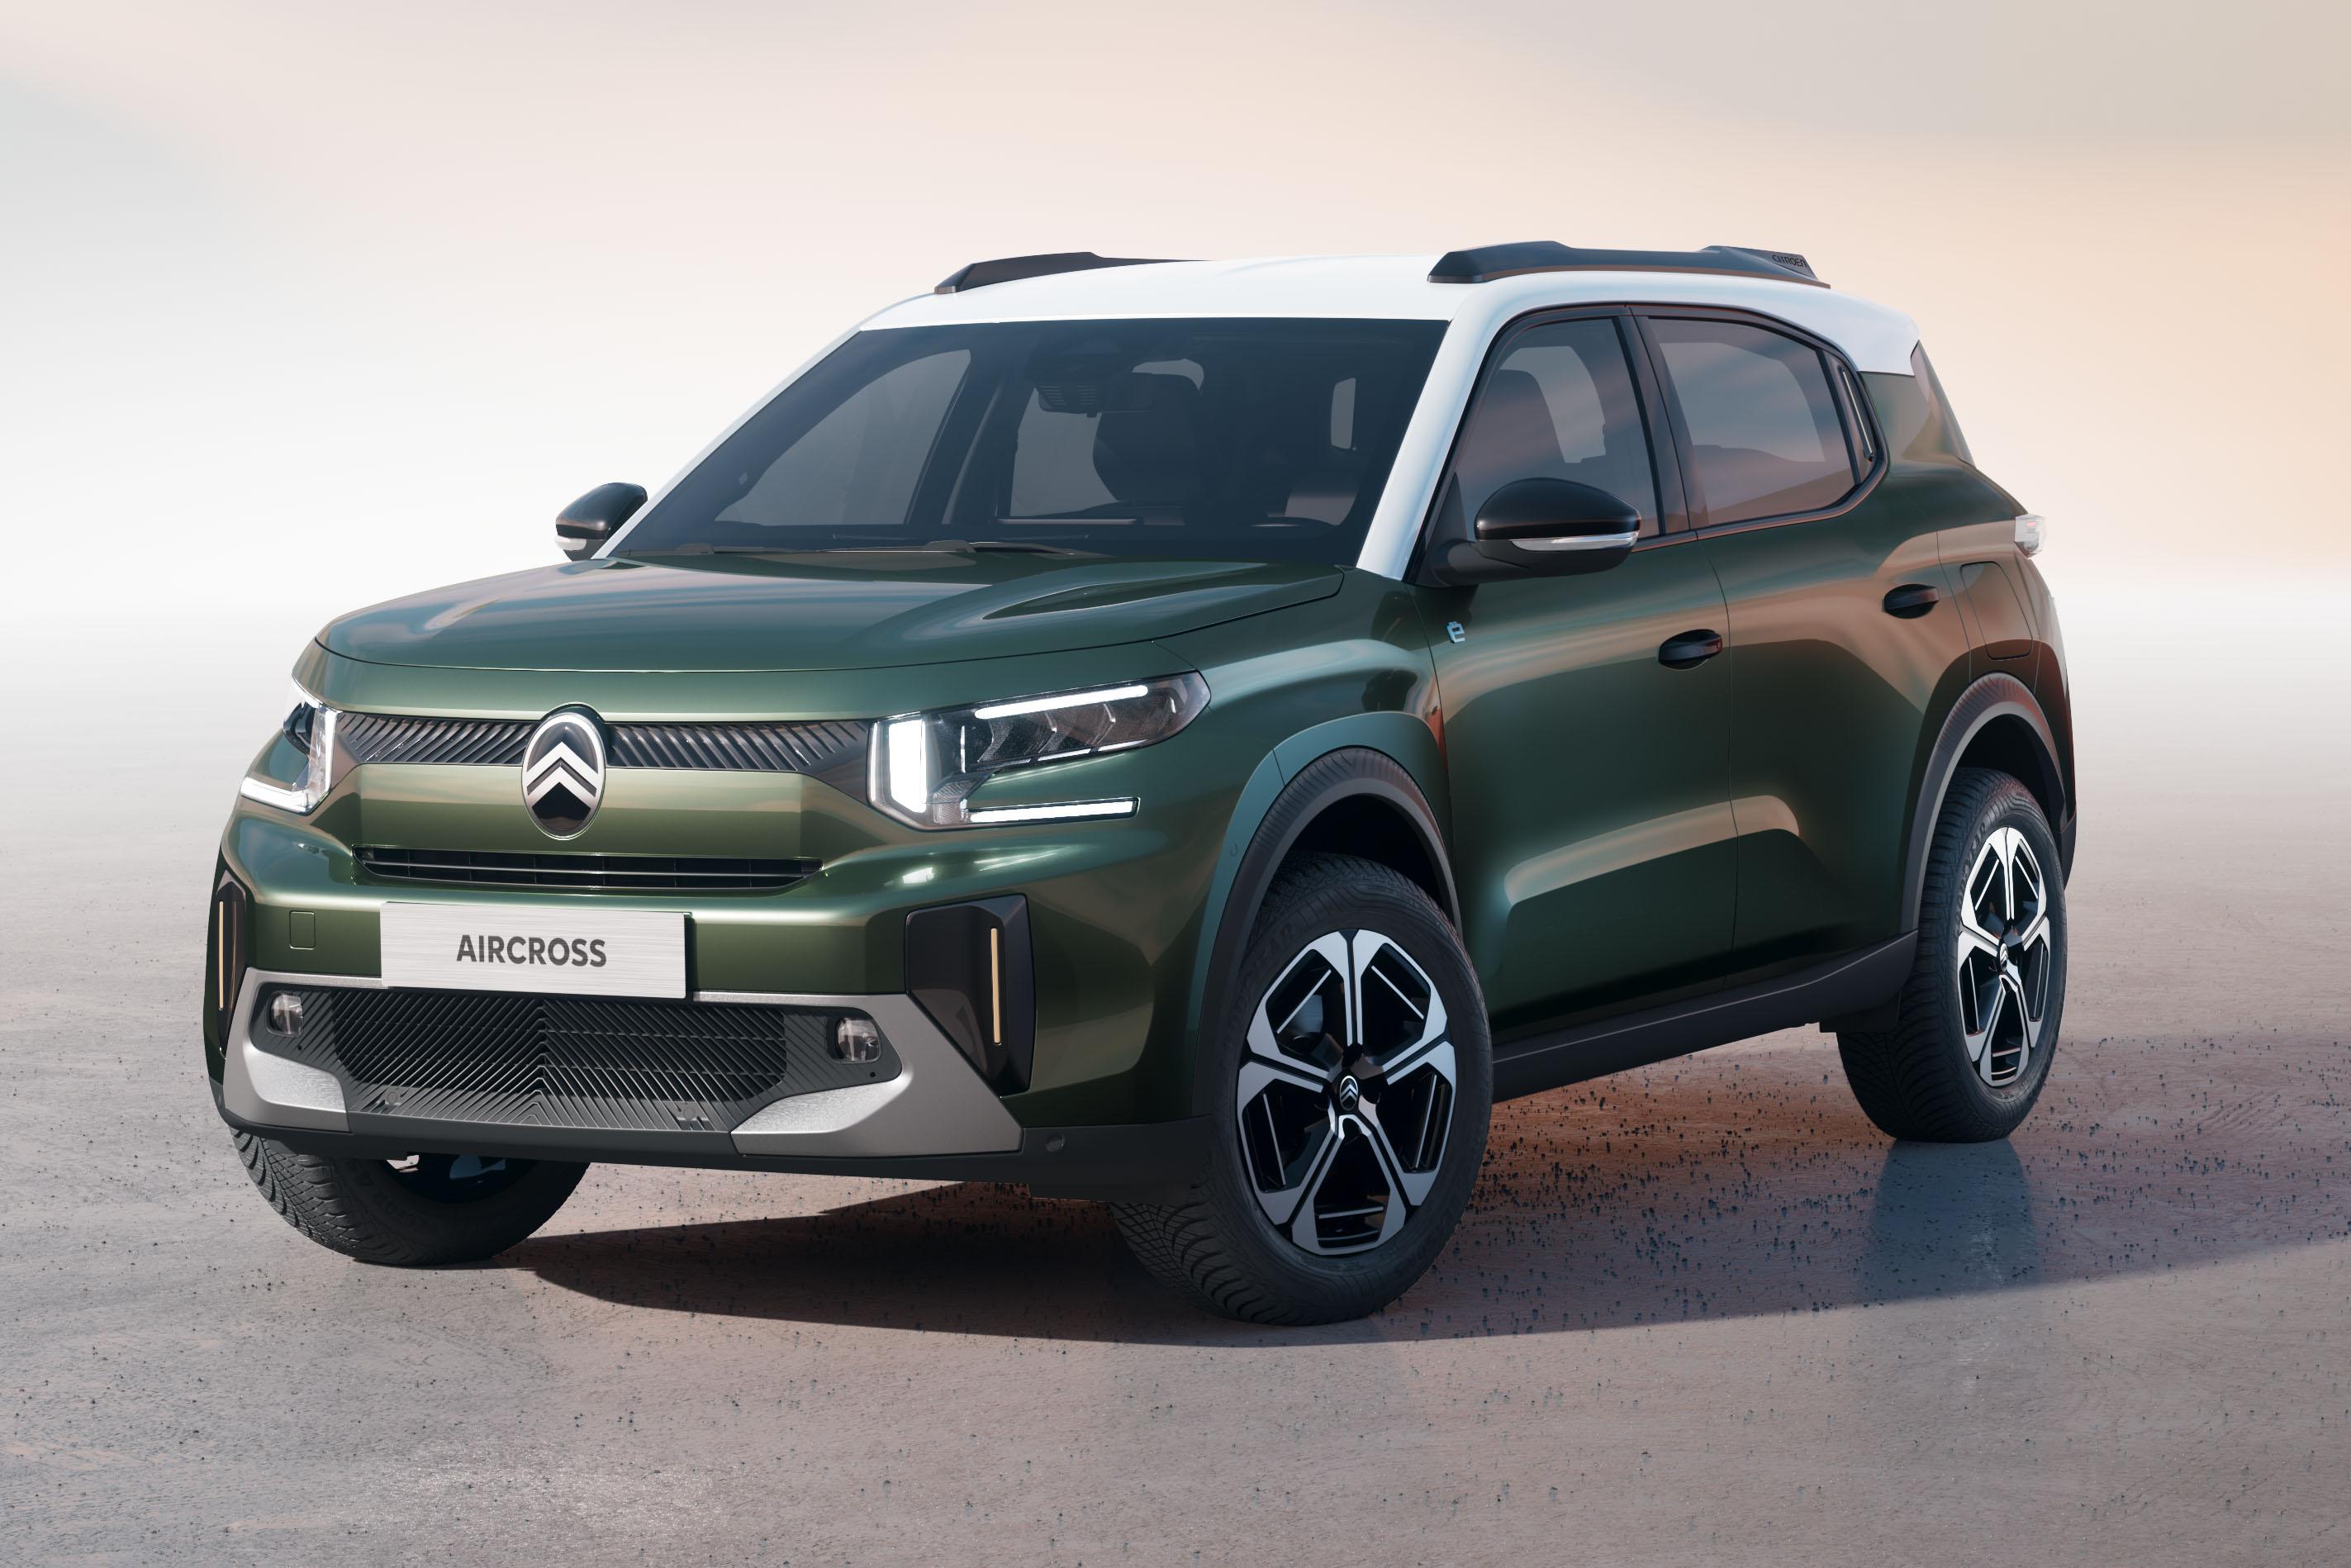 2025 citroen c3 aircross unveiled with squarer styling, seven seats